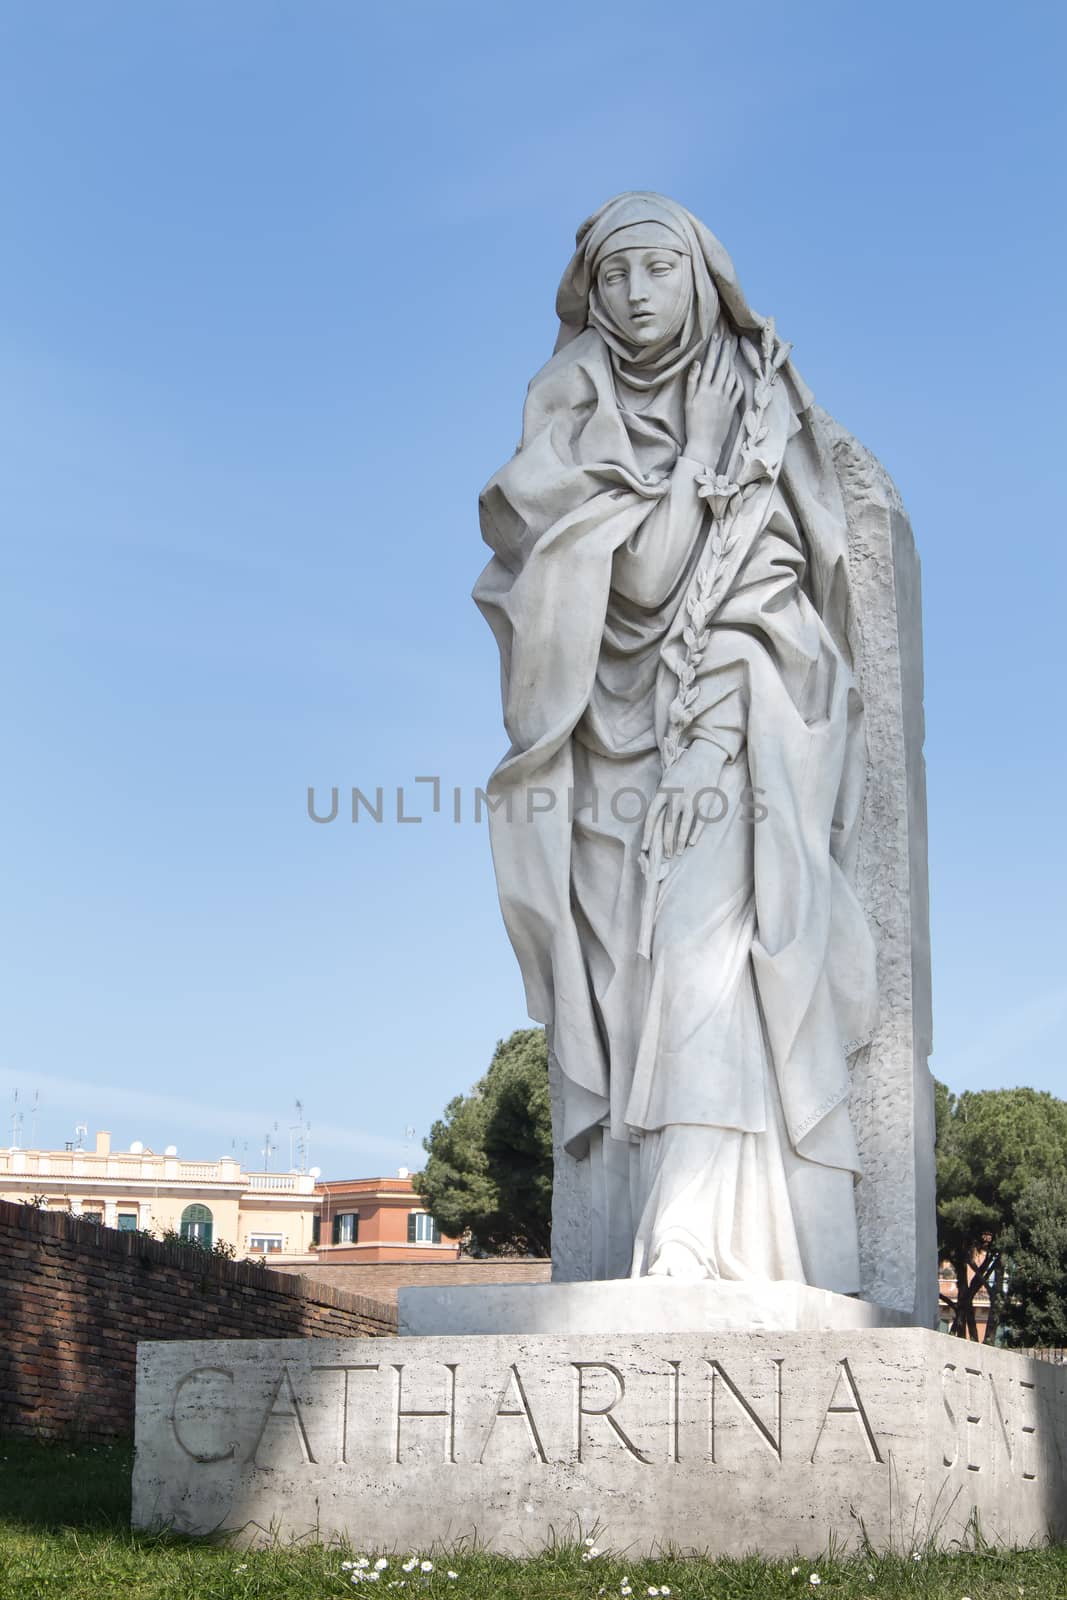 Statue of Catharina in Rome, Italy by YassminPhoto